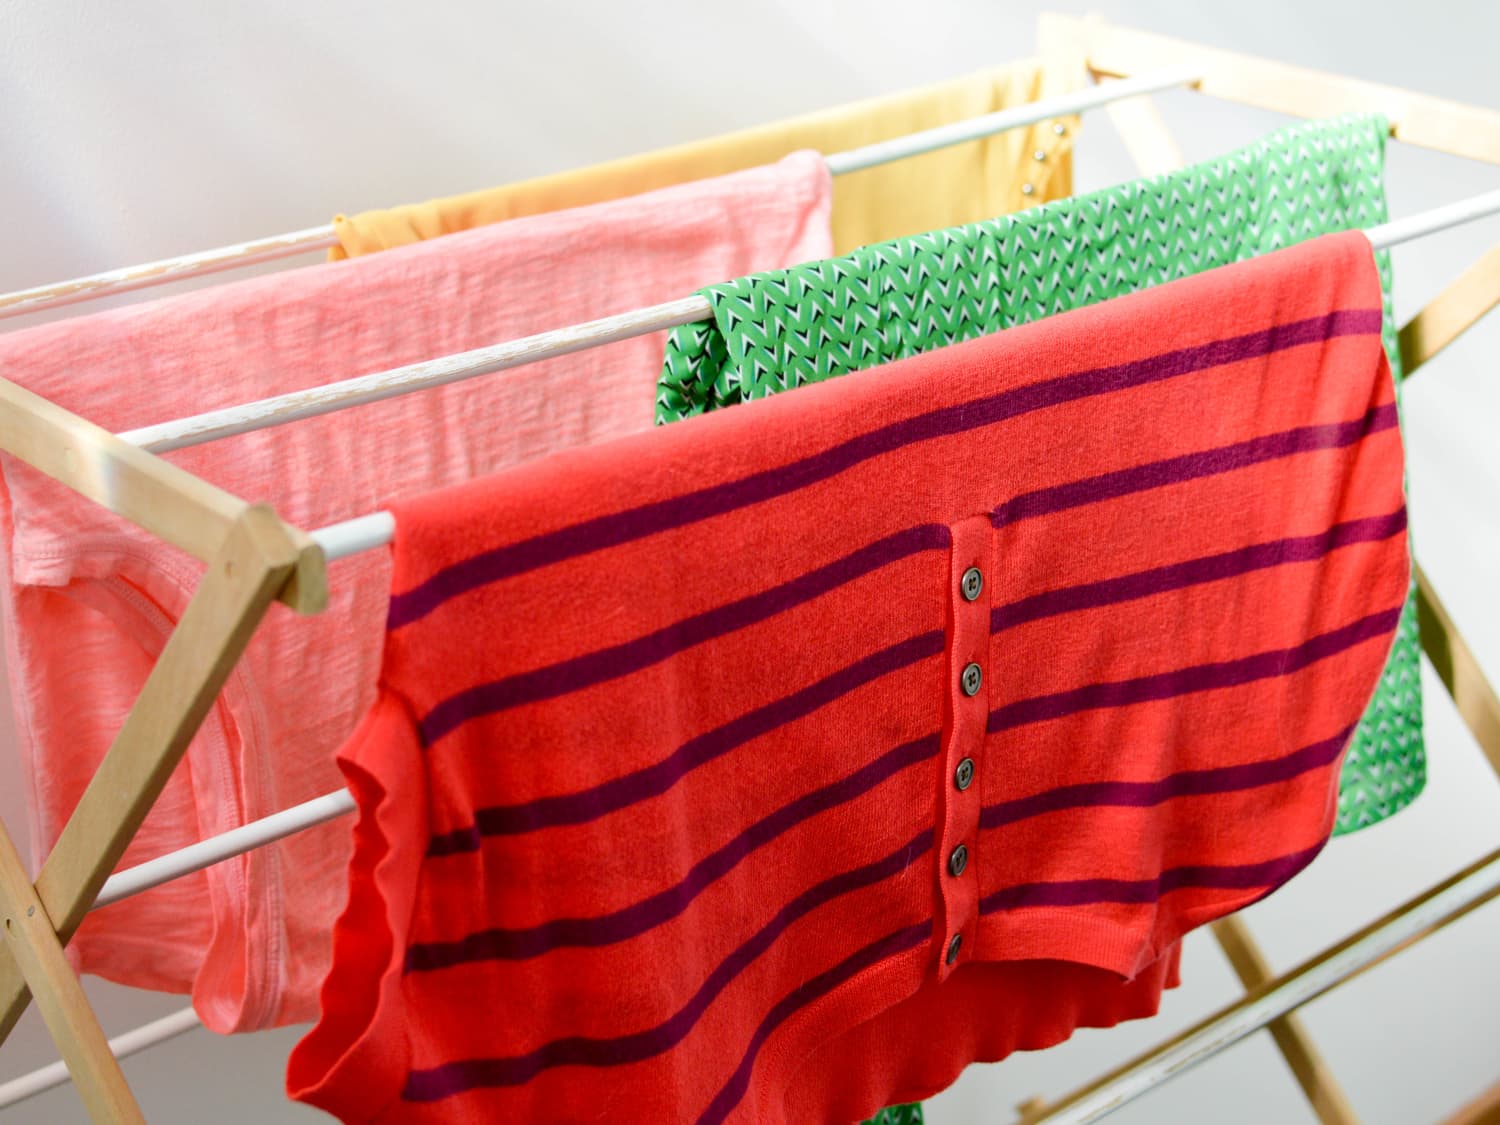 This TikTok Shows an Ingenious Way to Have a Drying Rack in a Small Space